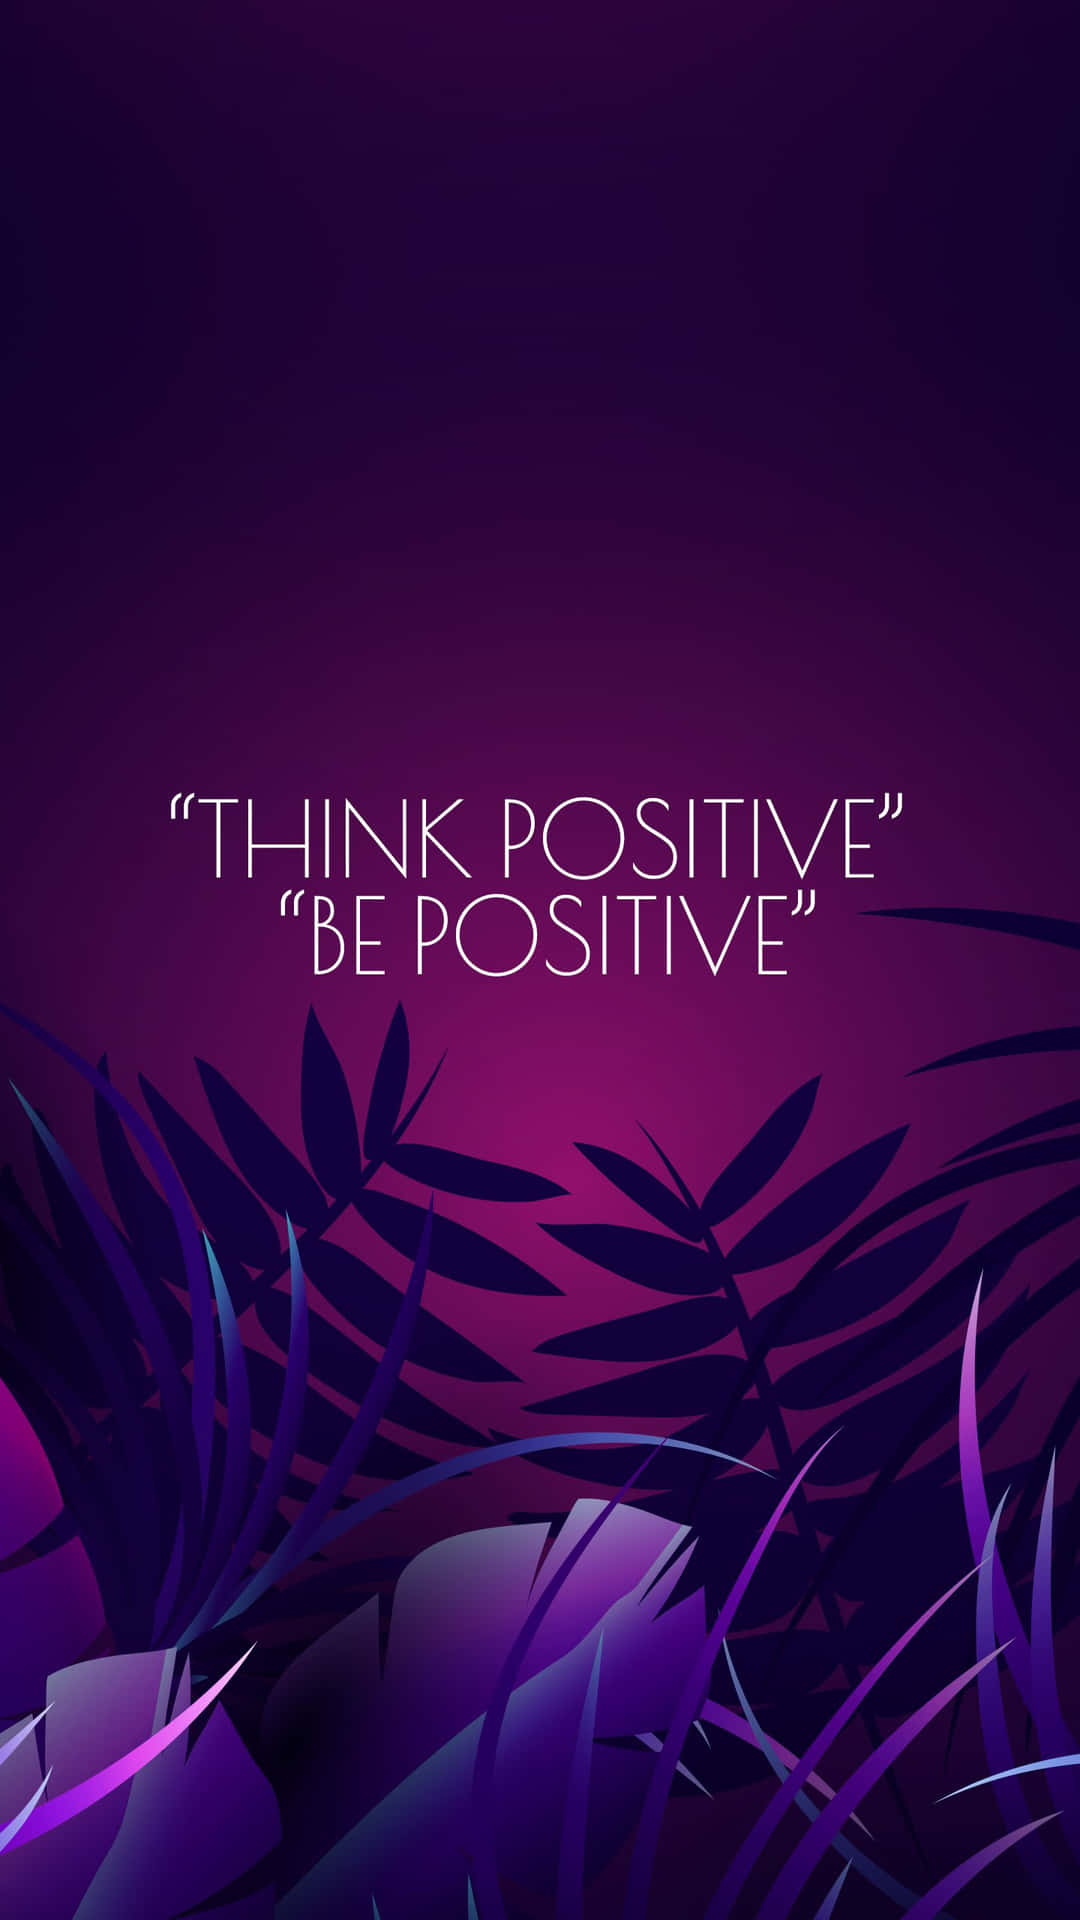 Stay positive wallpaper | Positive wallpapers, Positive quotes wallpaper,  Inspirational quotes wallpapers